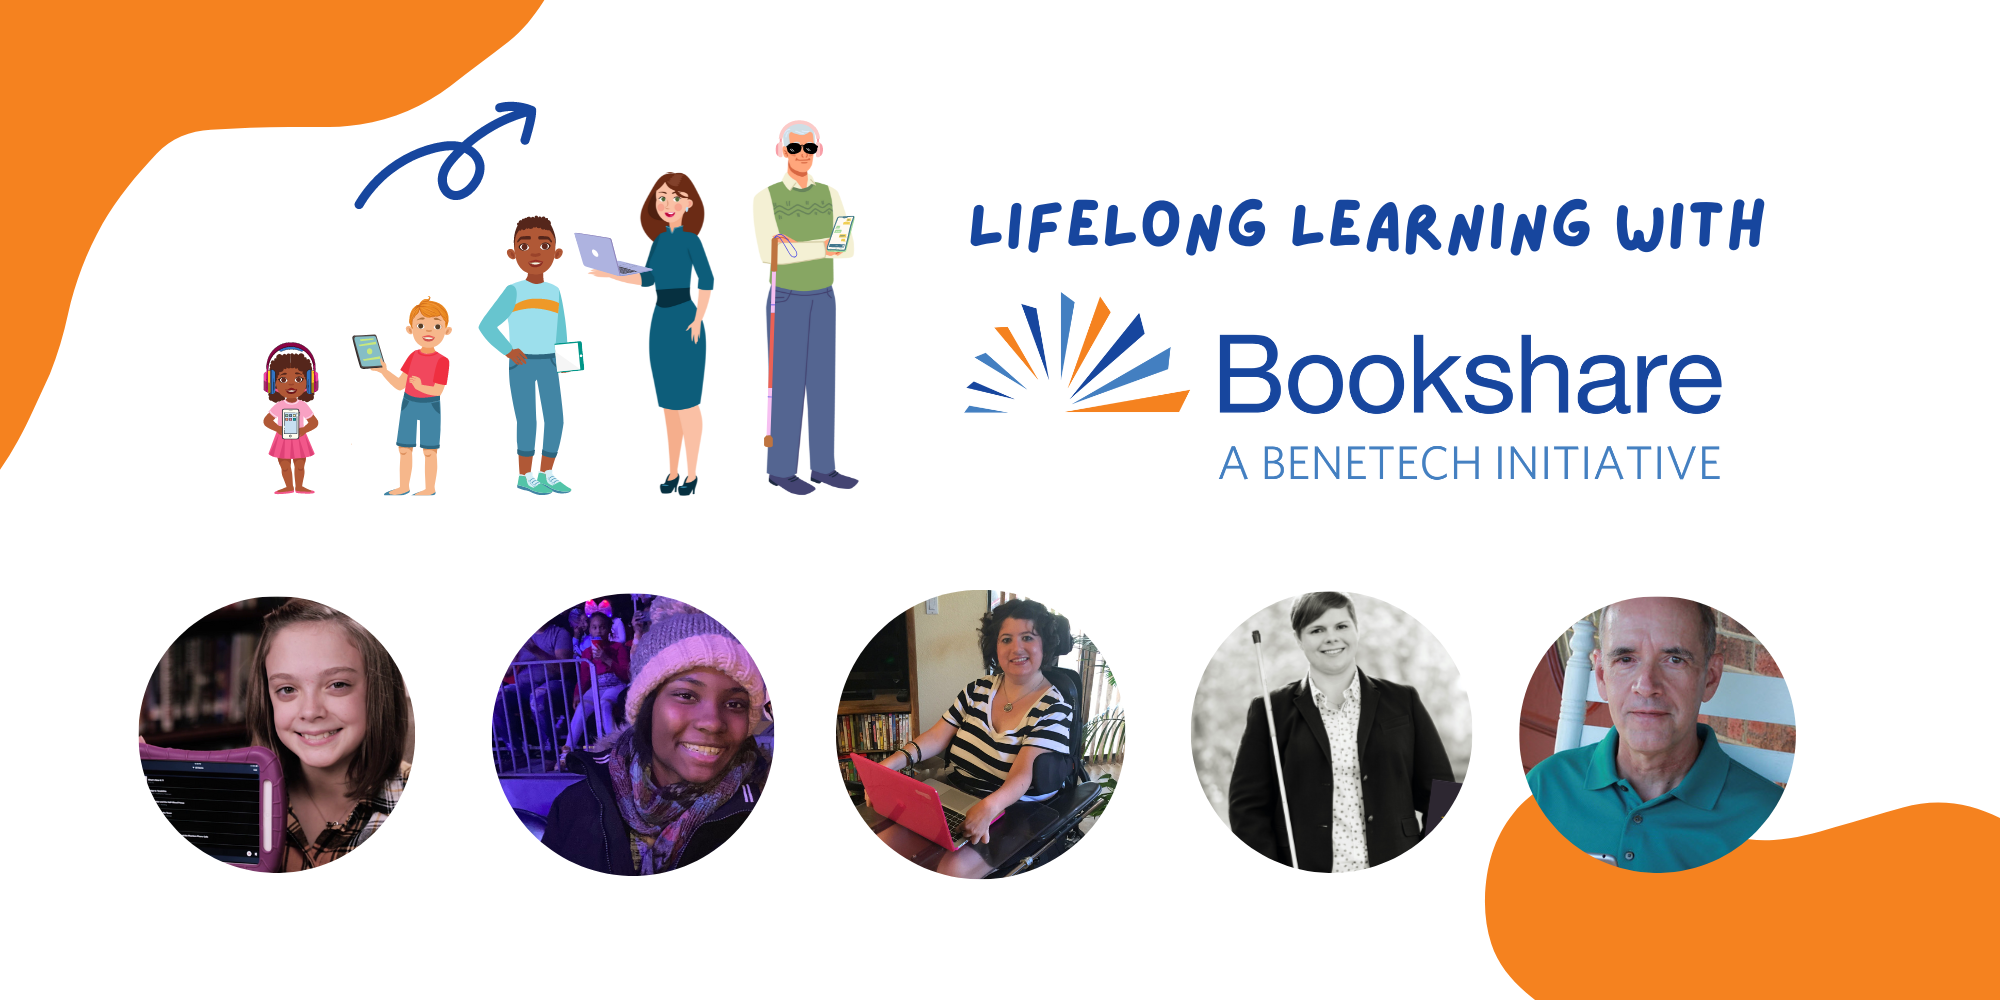 Lifelong learning with Bookshare. Illustration of Bookshare users of all different ages and disabilities. Real photos of various Bookshare users.